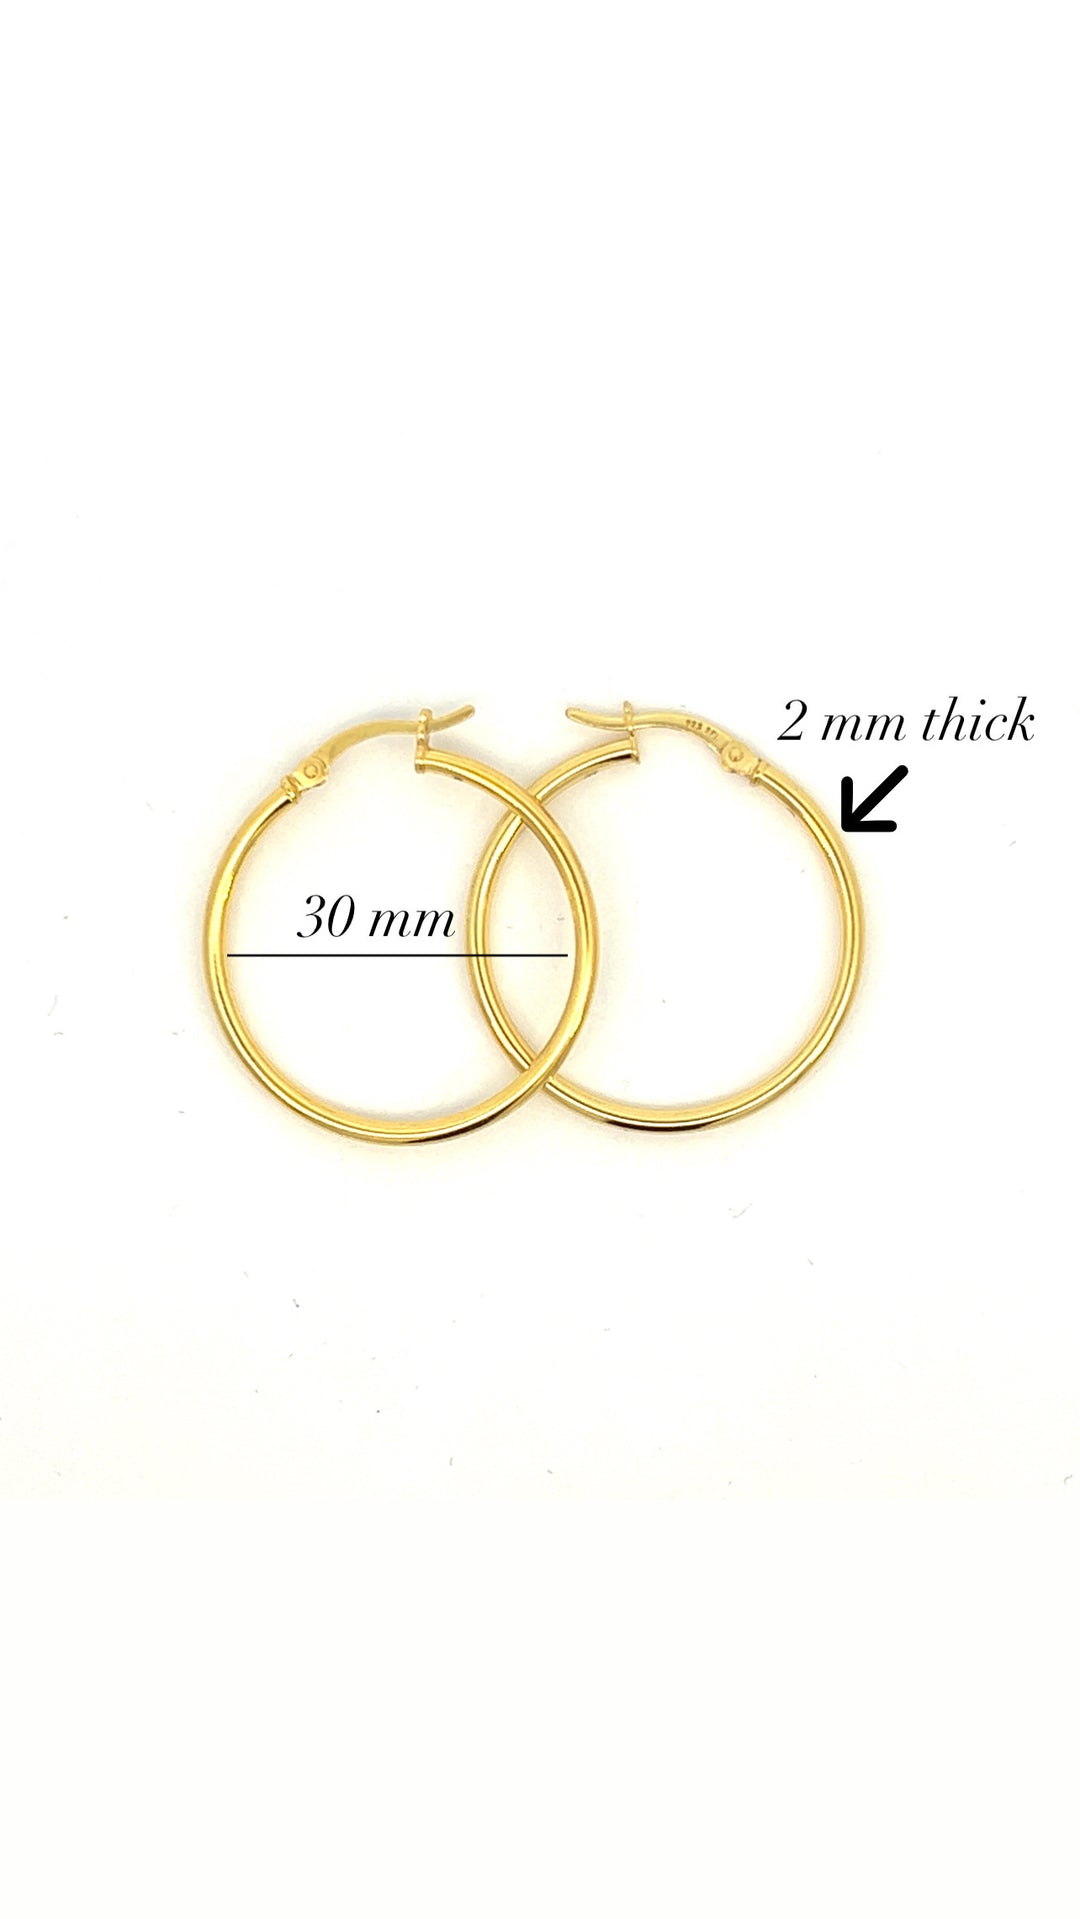 Sterling Silver 2mm Thick, 30 mm Diameter Hoop Earring - Gold Plated - Silvadi